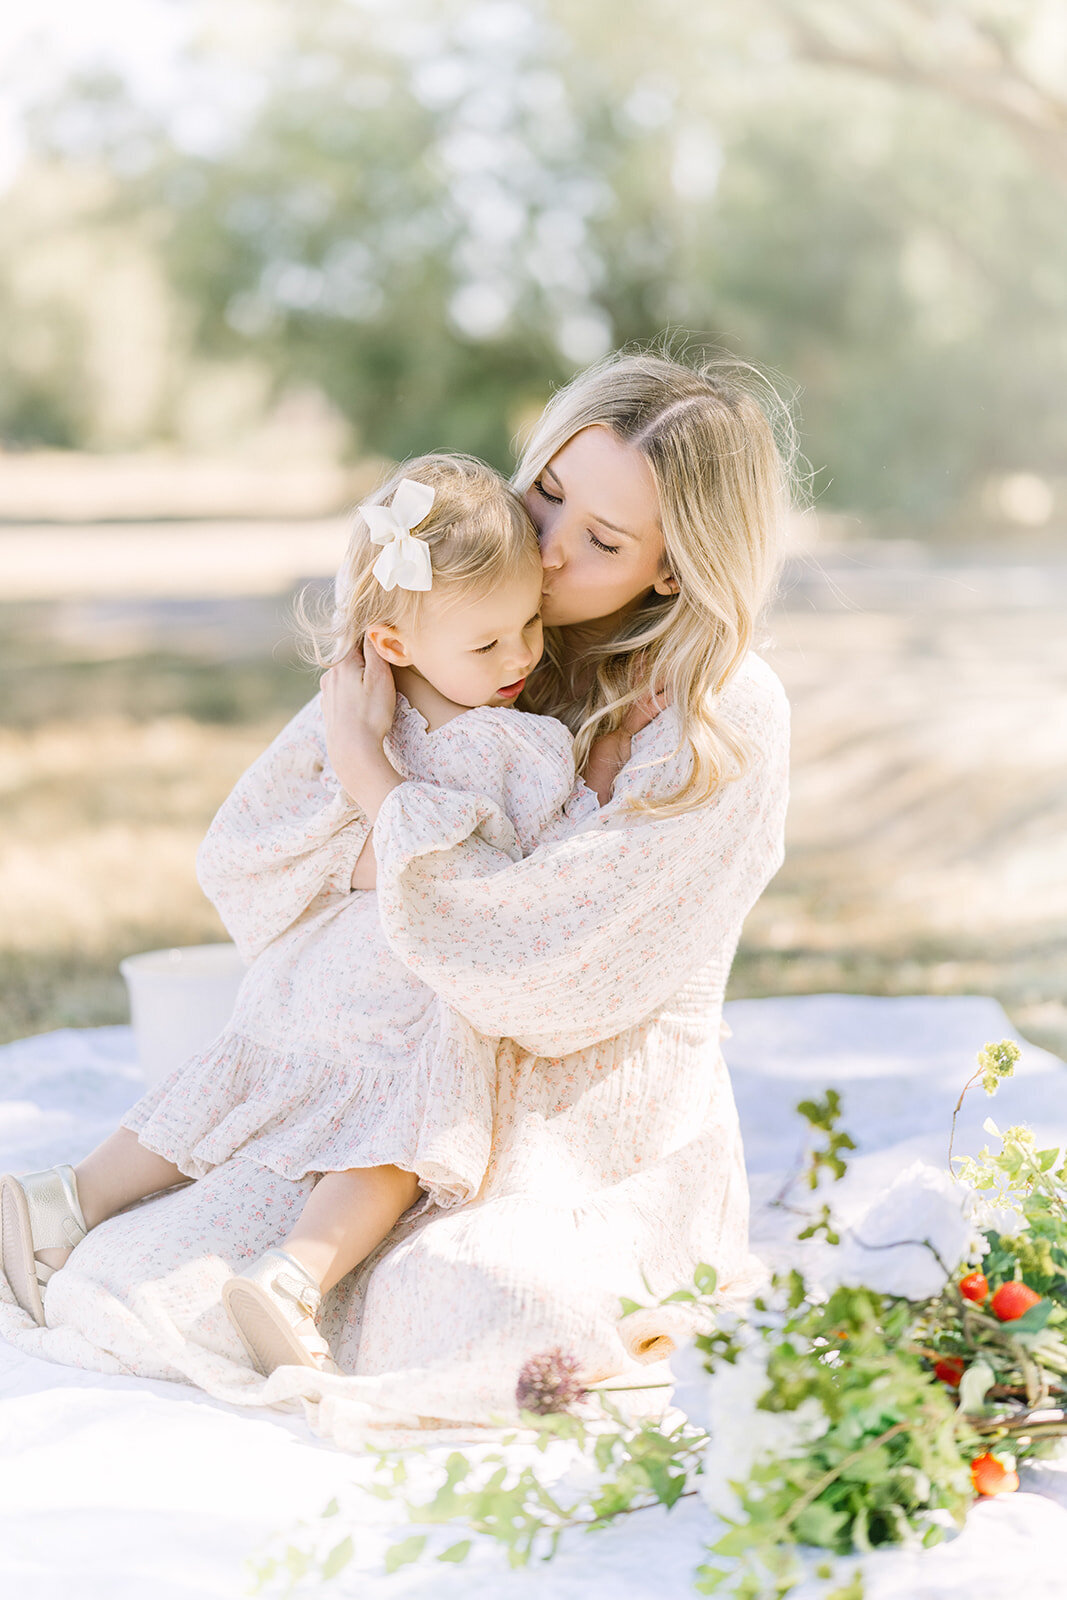 Mother and daughter embrace during a strawberry themed elegant tea party.